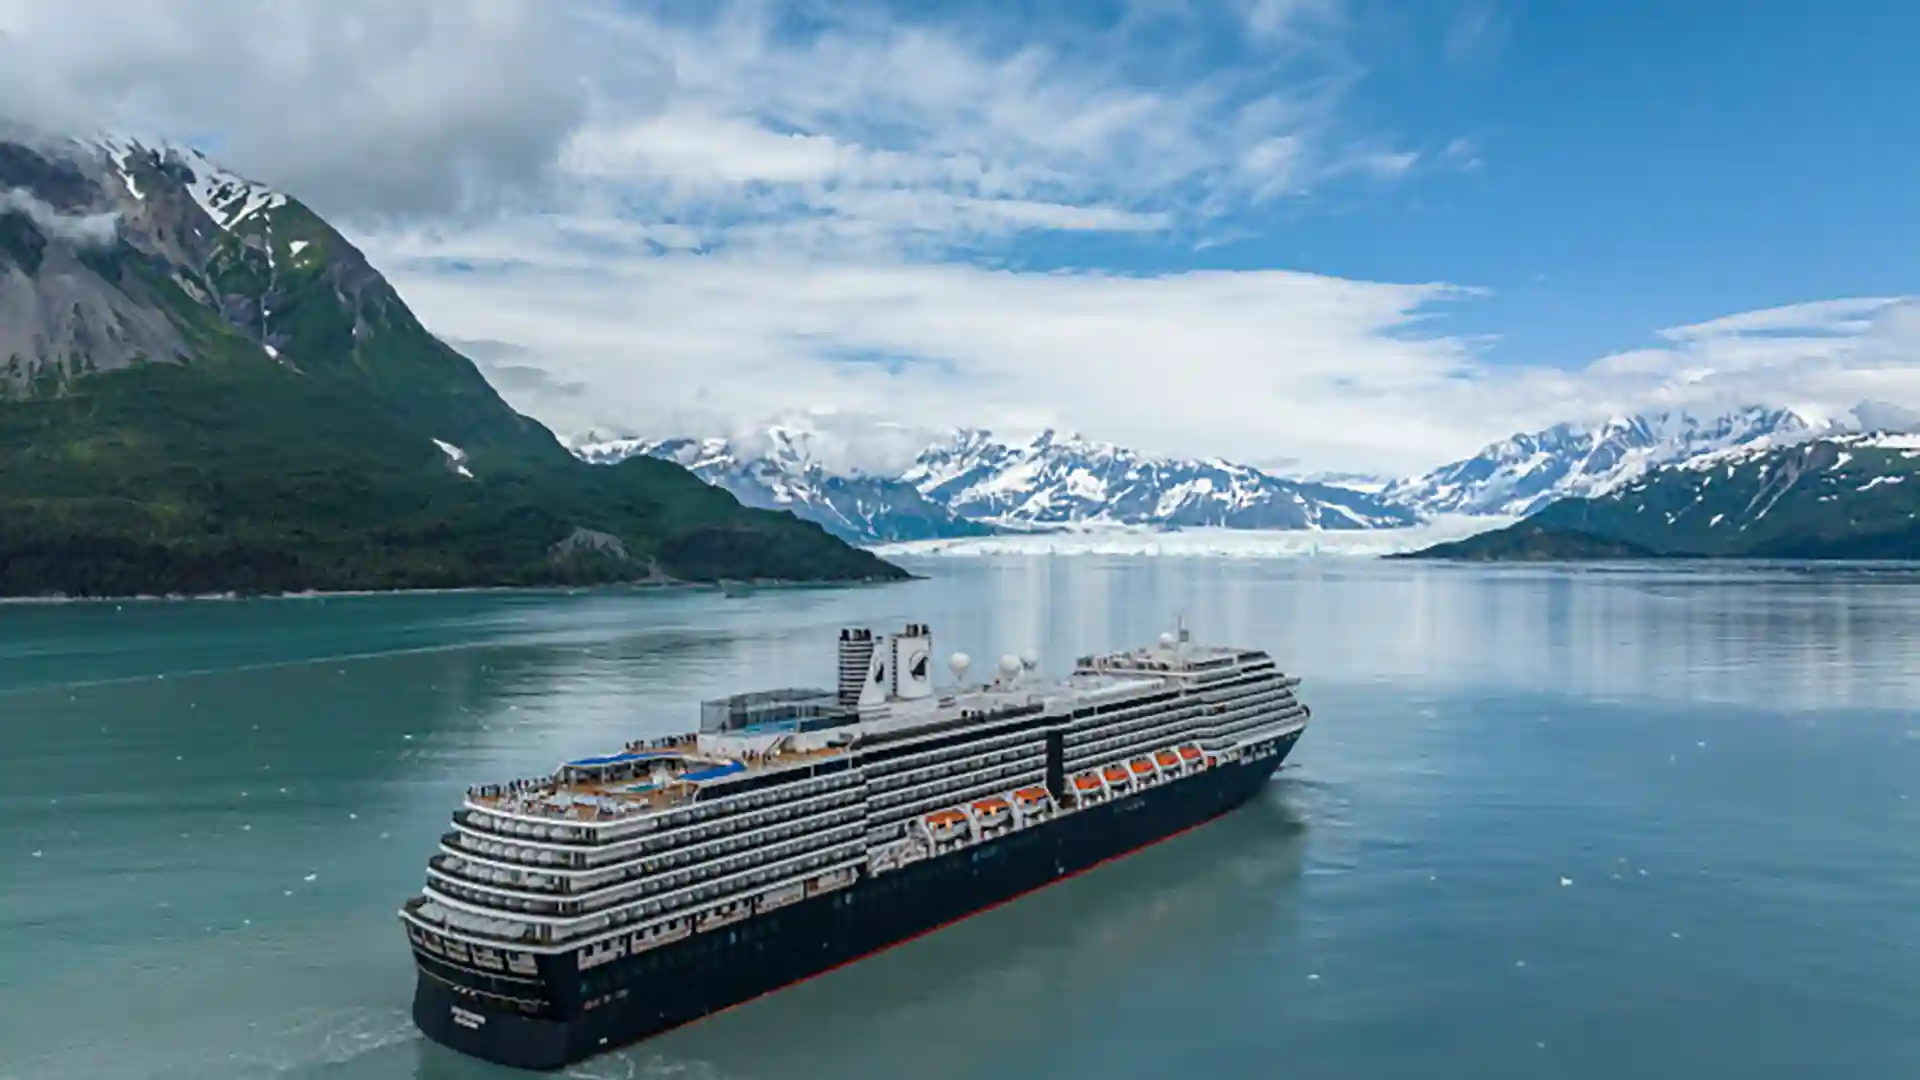 View of Holland America Line cruise ship.